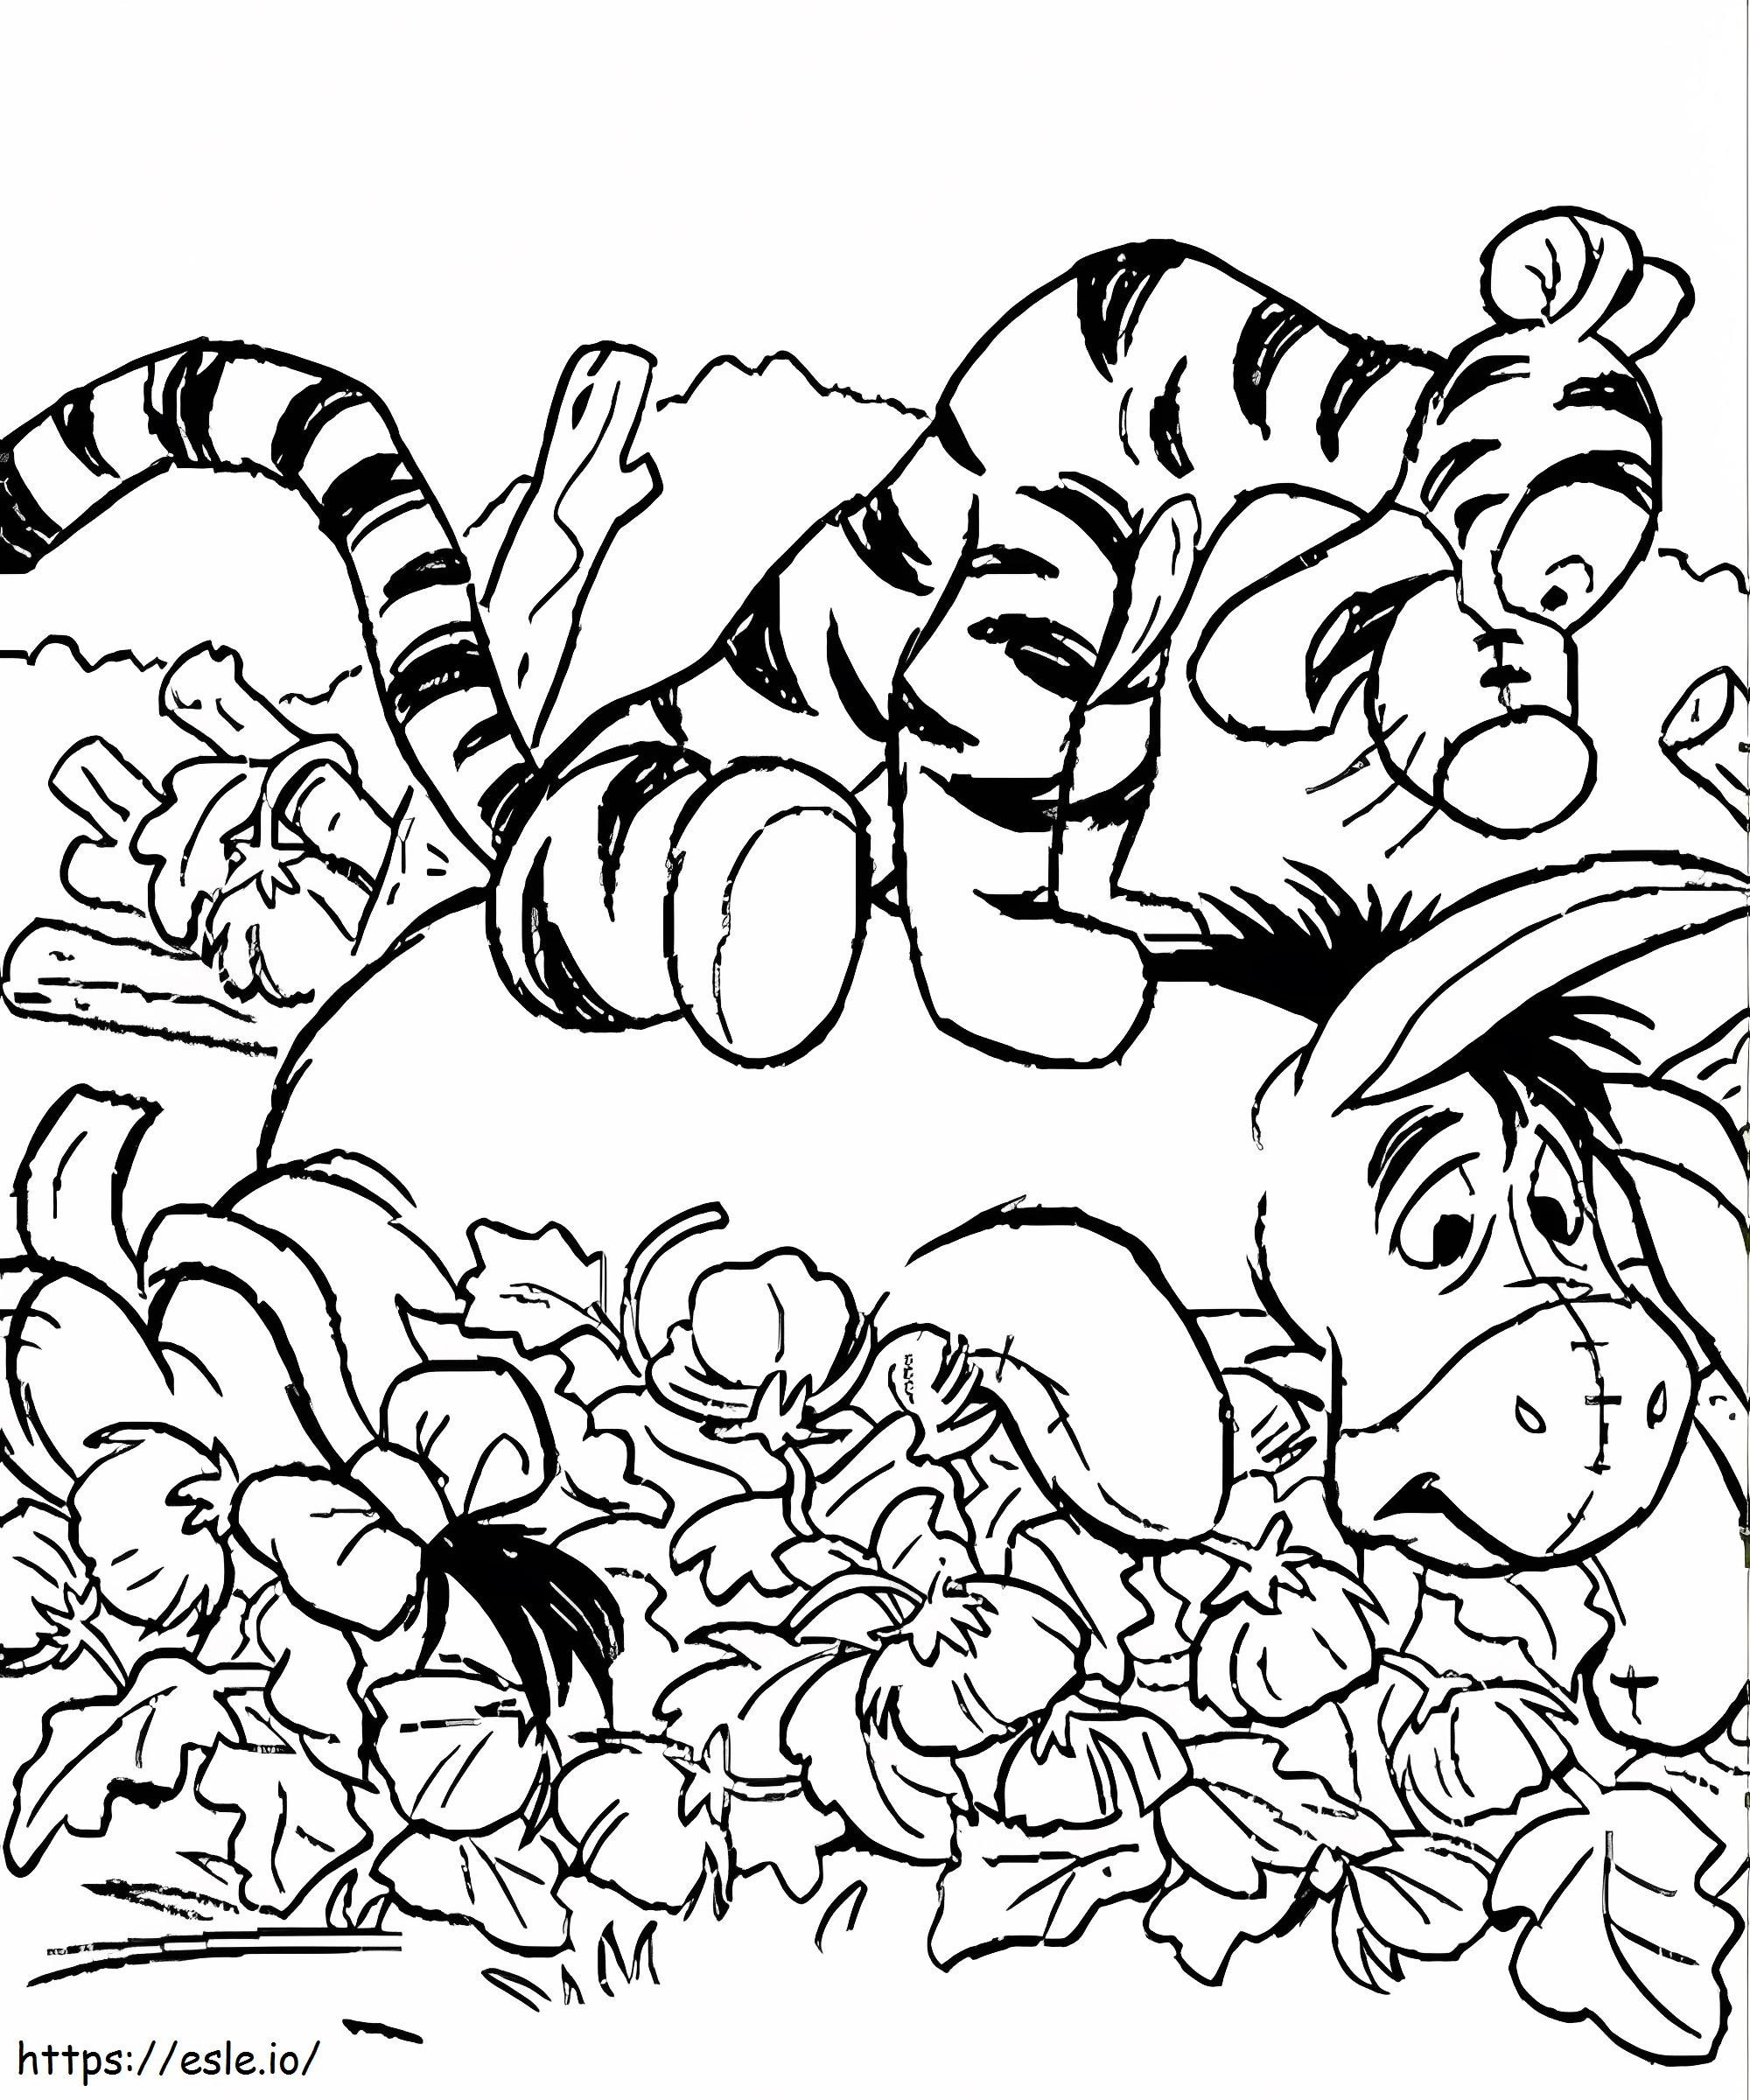 Tiger And Eeyore coloring page